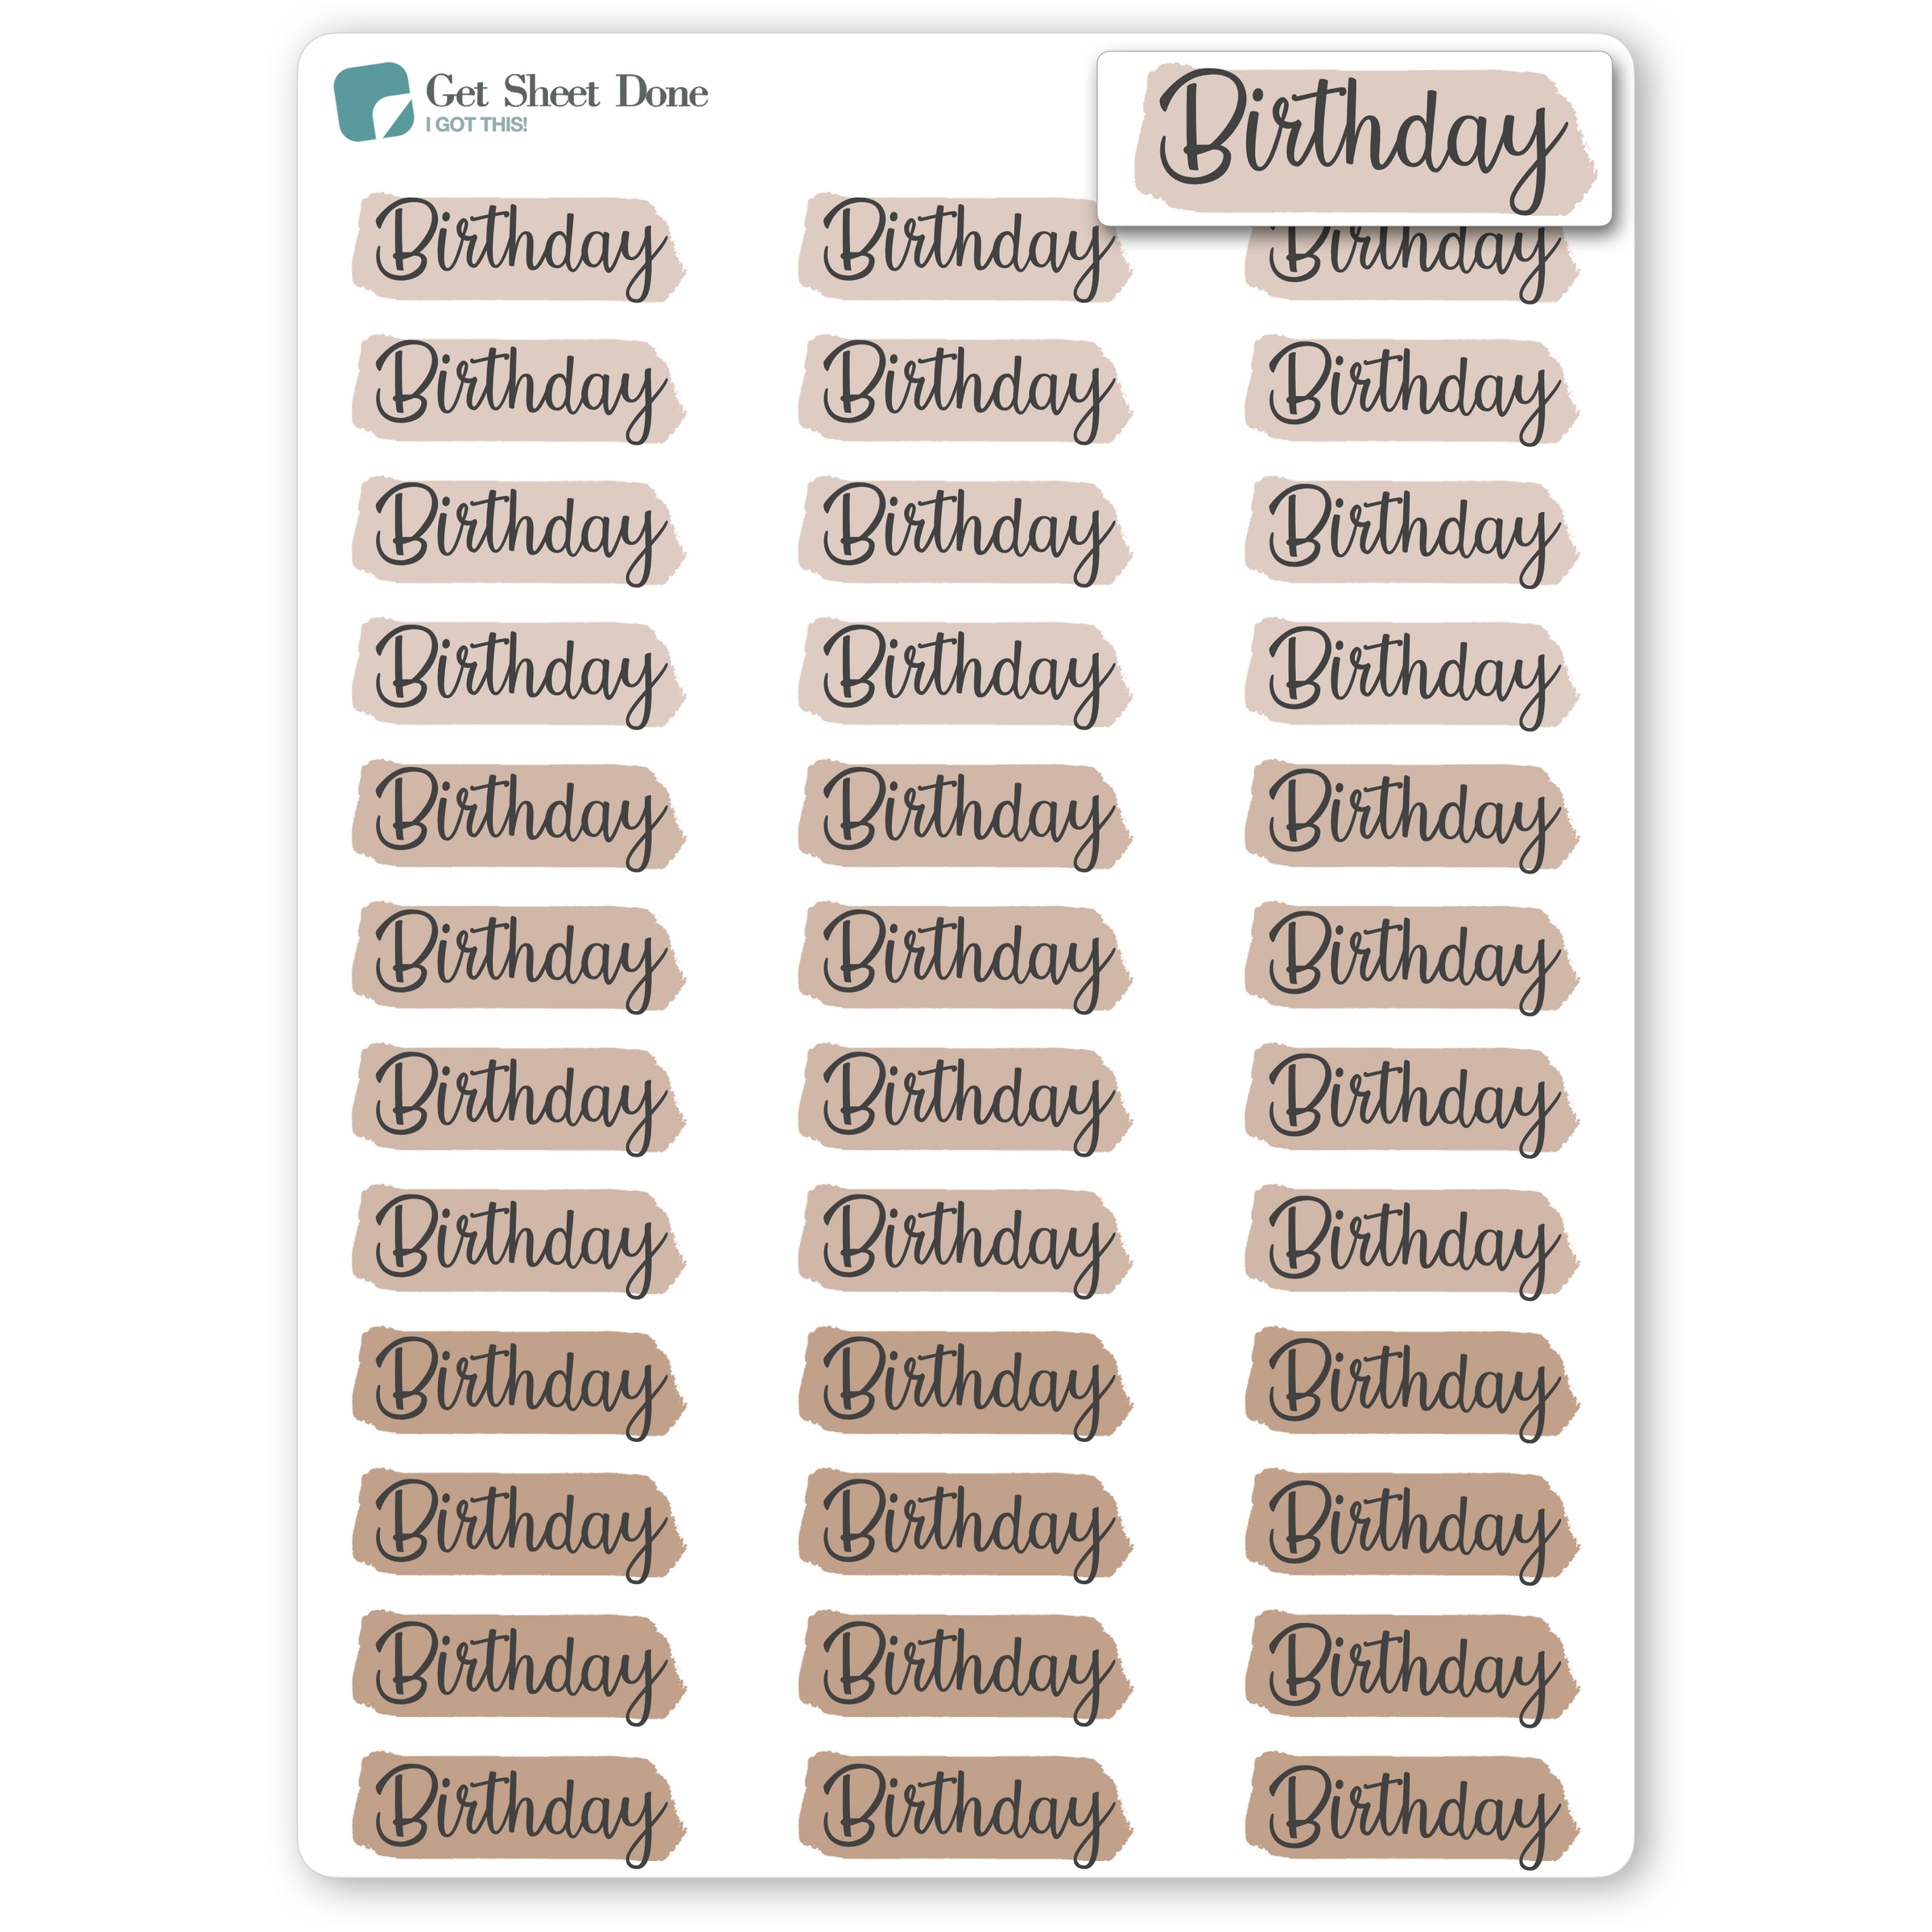 Highlight Birthday Planner Stickers / Chore Reminder Stickers/ DIY Calendar Stickers / Script Text  / Bullet Journaling / Bujo / Essential Productivity Stickers